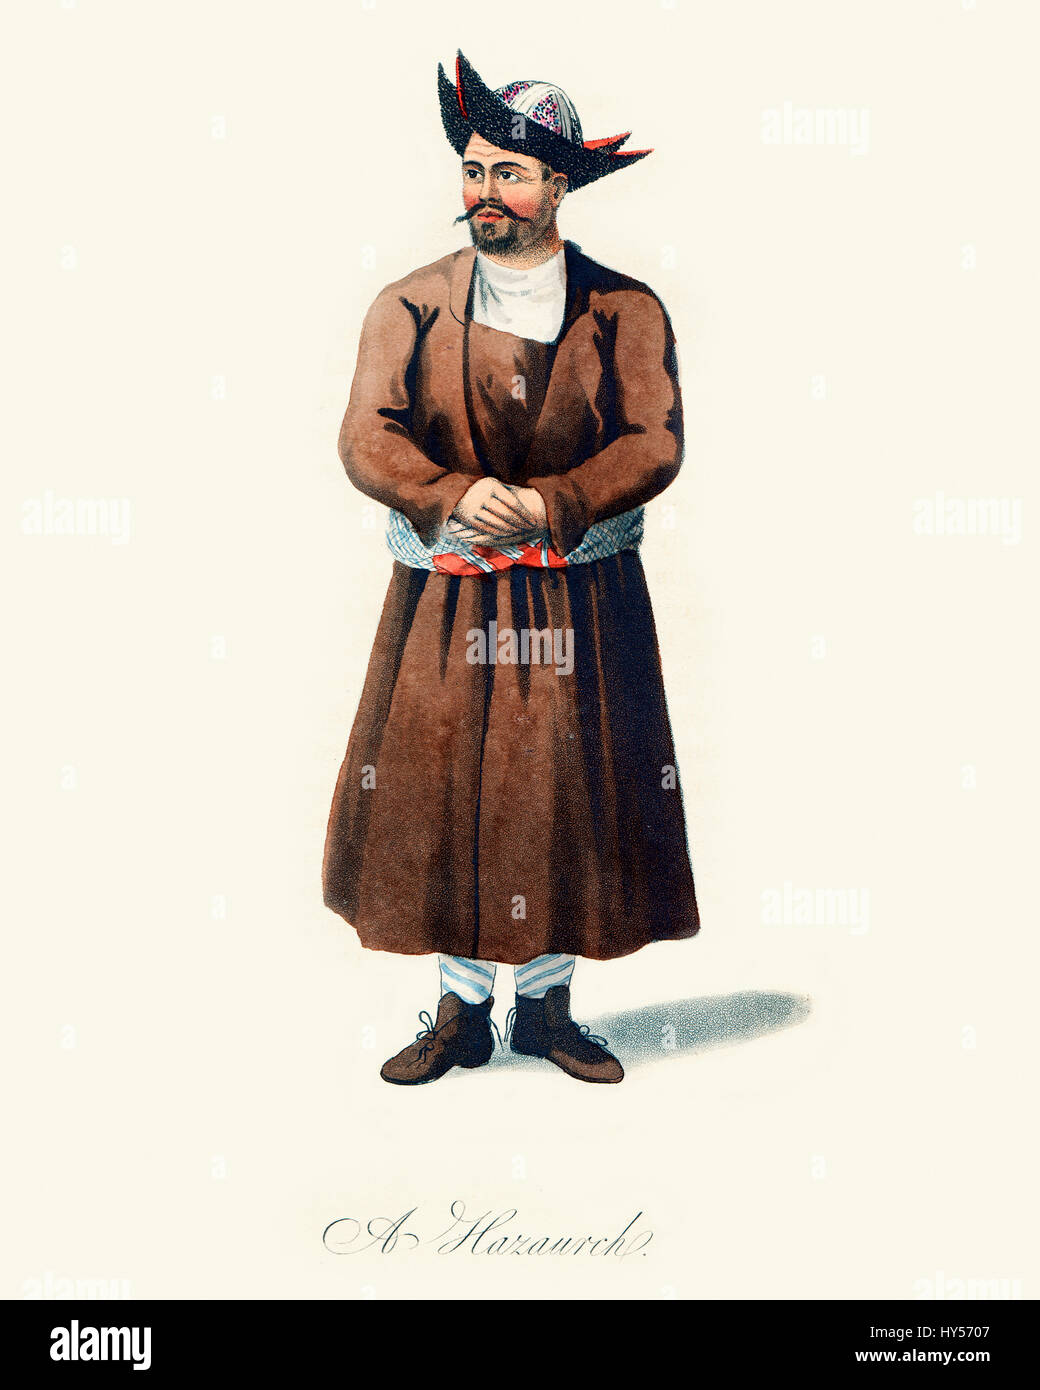 Vintage colour engraving from 1819 showing an Afghan man of Hezareh Stock Photo